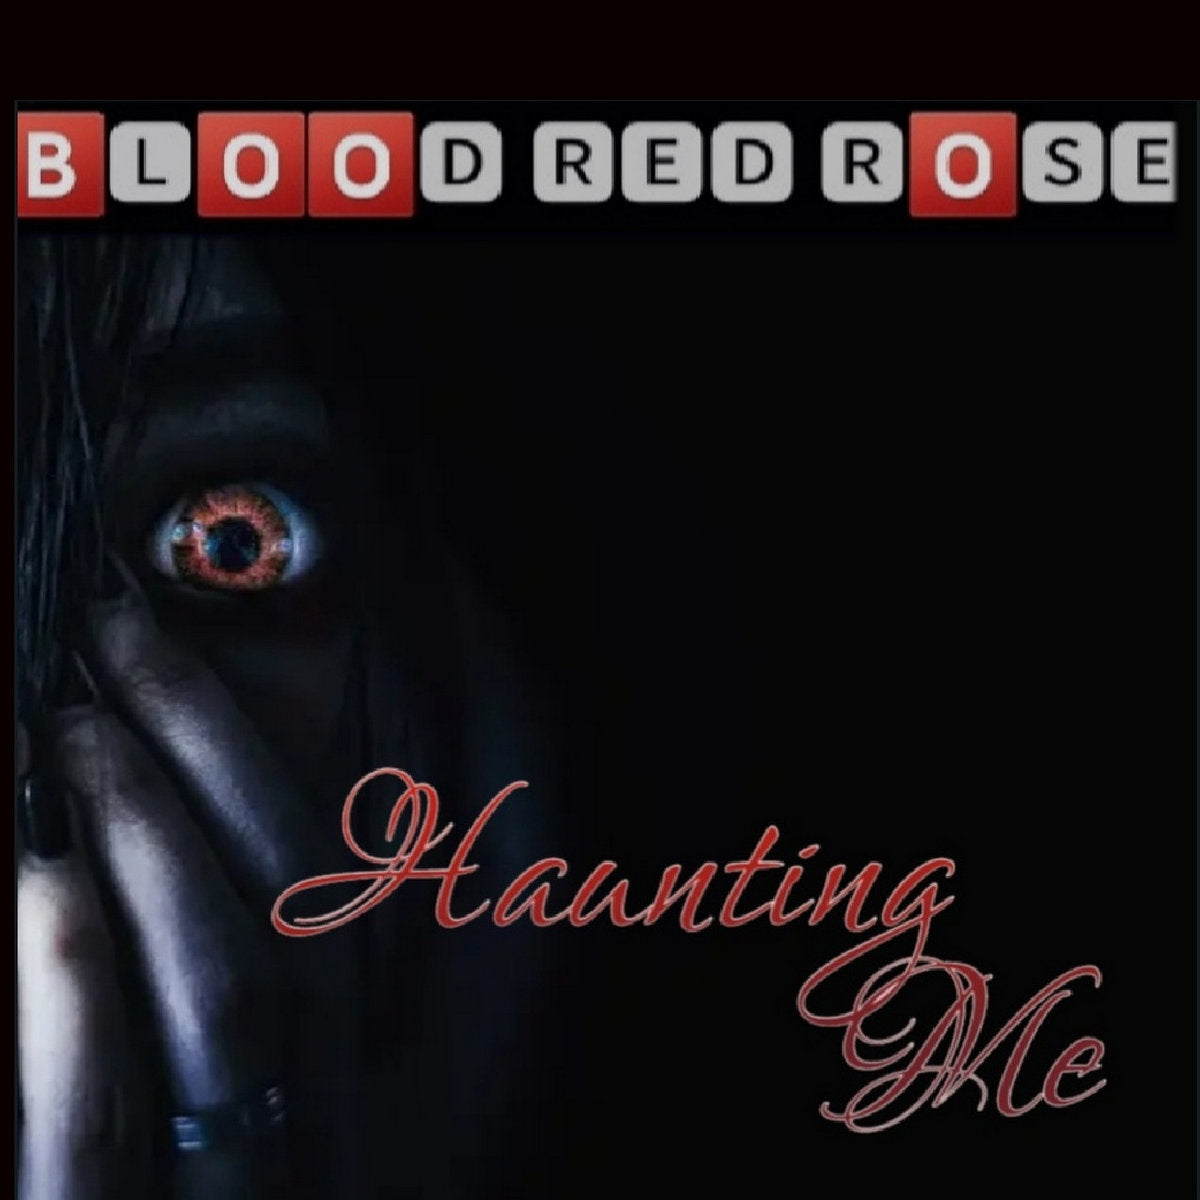 Blood Red Rose – ‘Haunting Me’